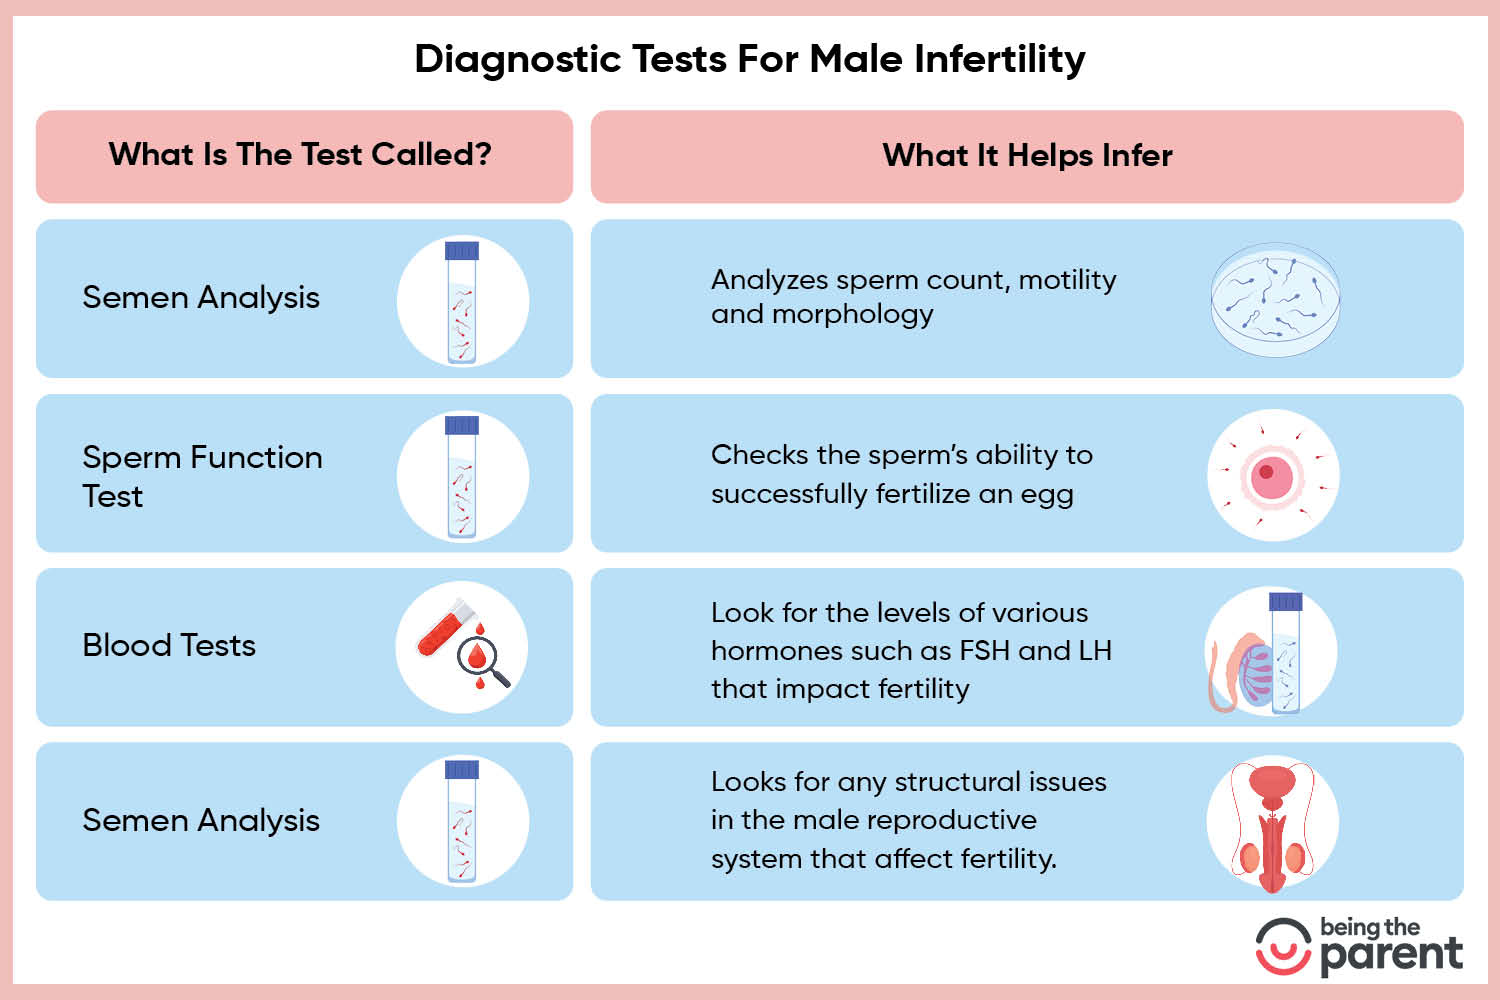 Tests for male infertility